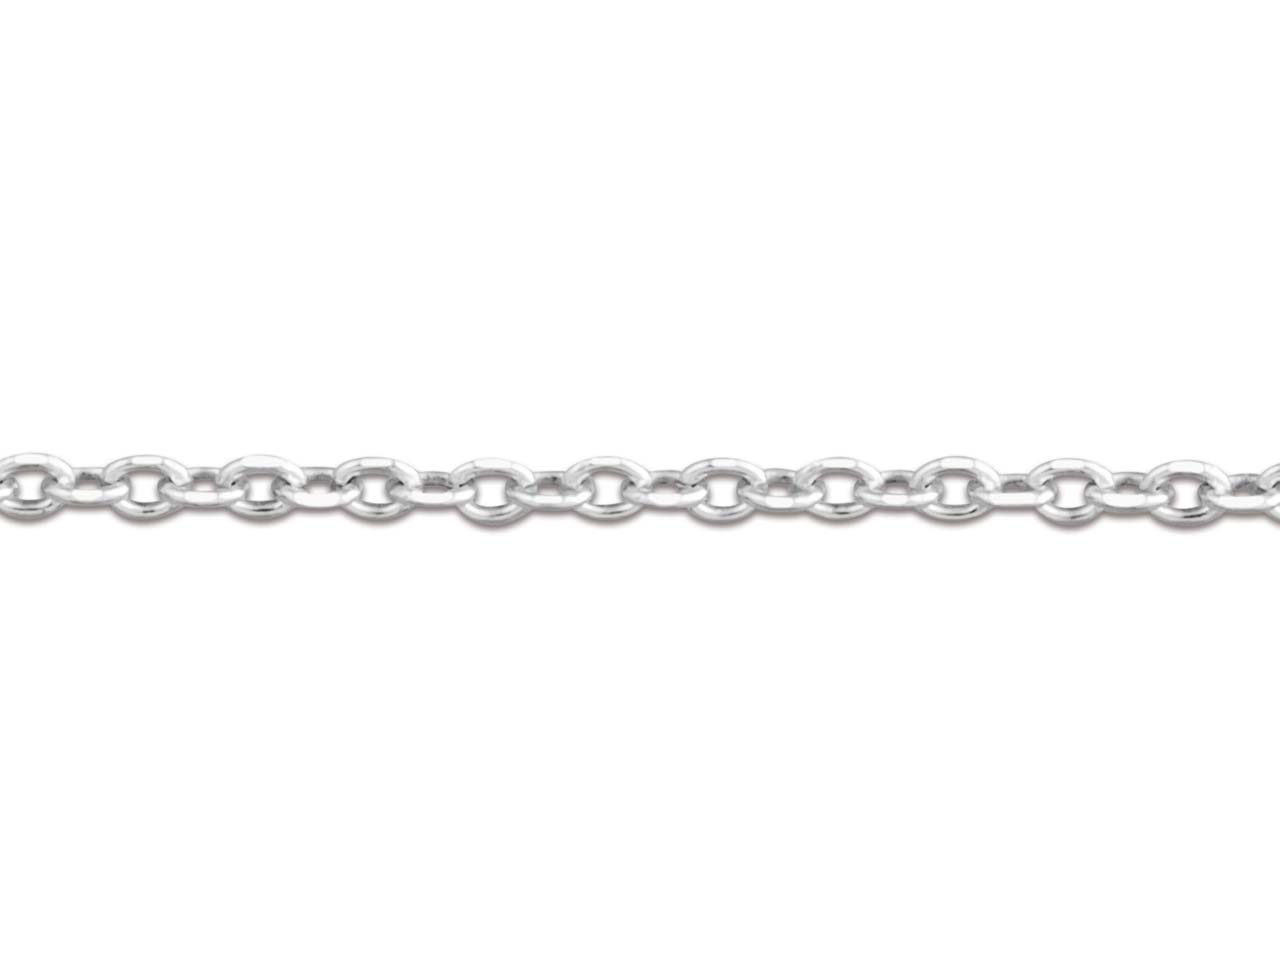 30" Sterling Silver .925 Chain Necklace Diamond Cut Trace Jewellery Chain 16"